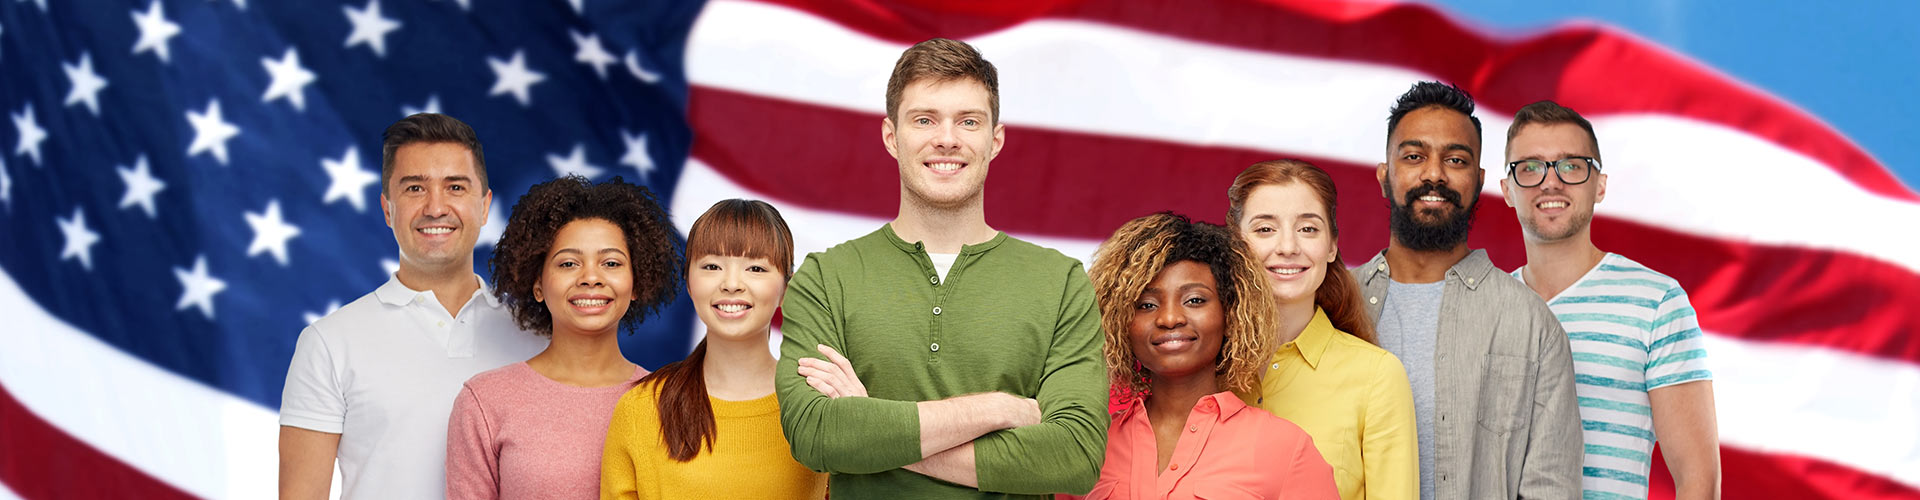 people of different ethnicity in front of the American flag